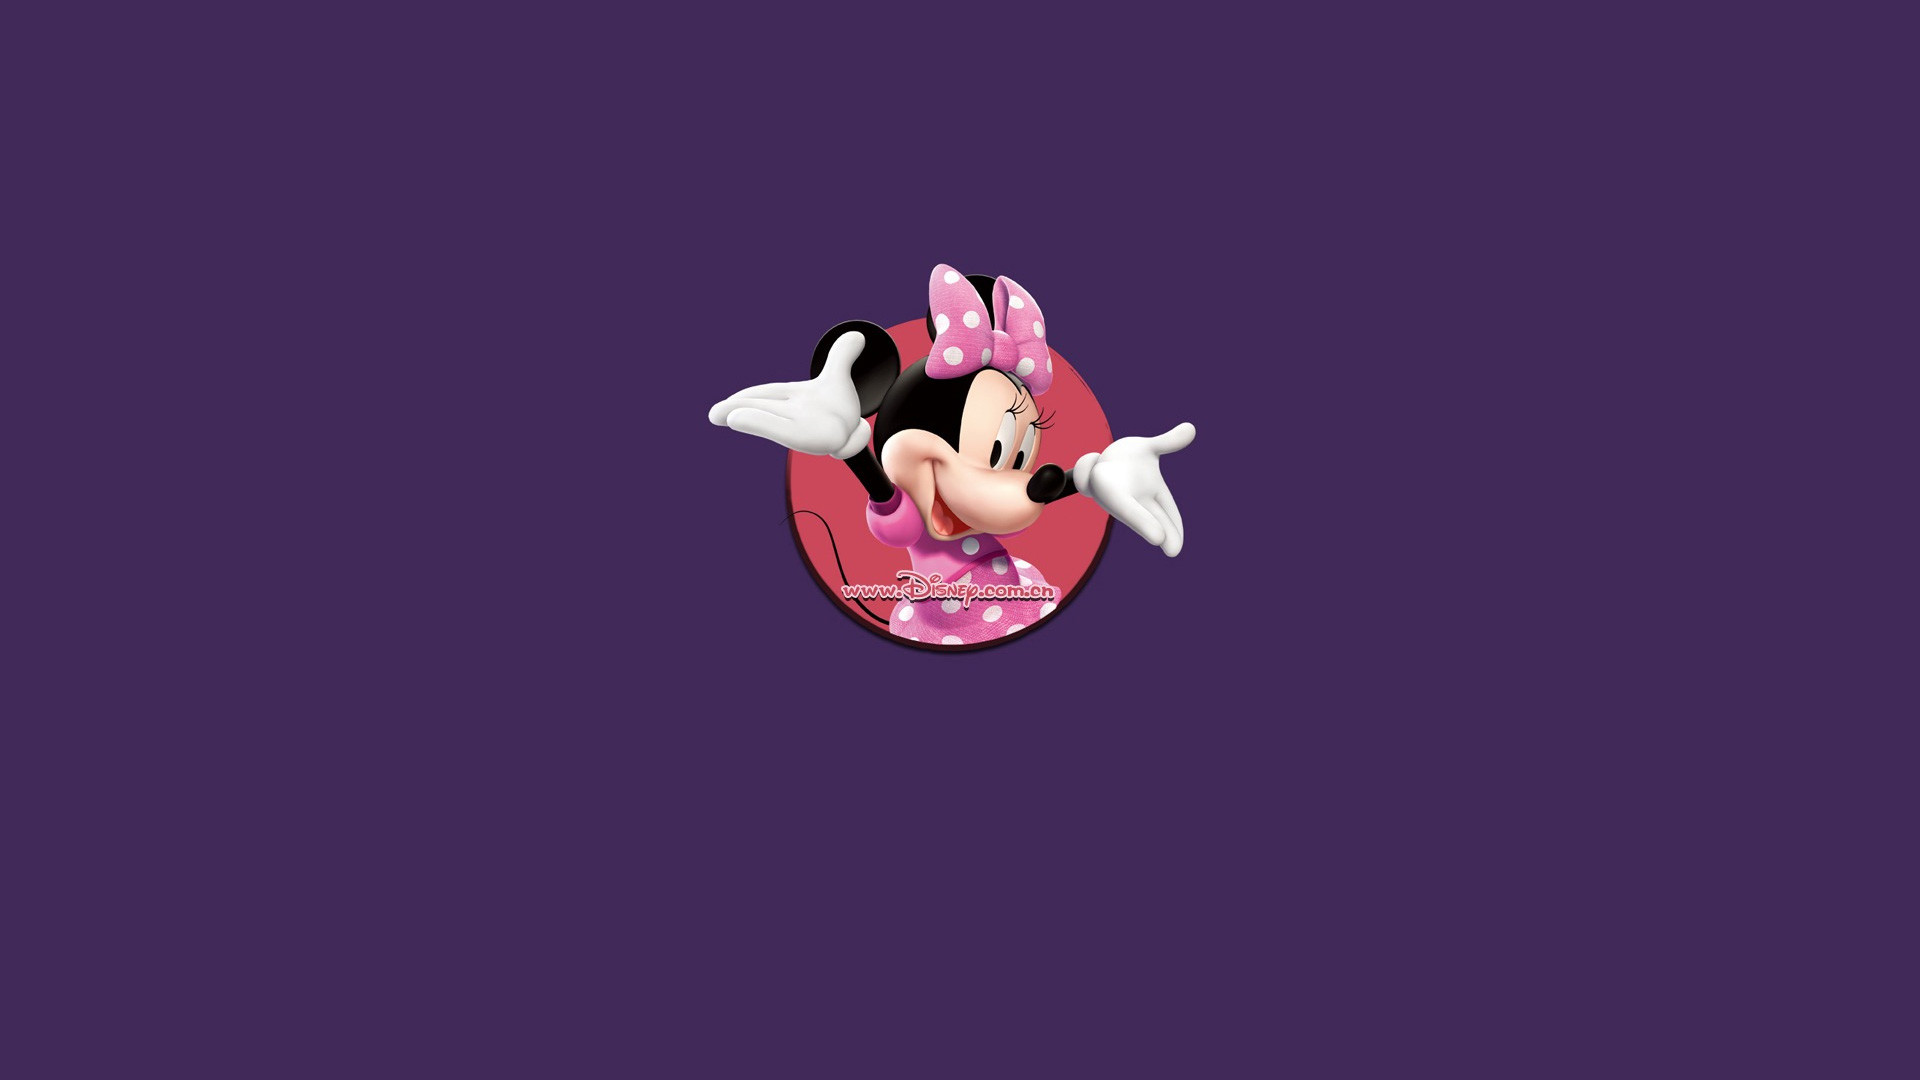 1920x1080 Iphone 5 Wallpaper. 268 Best Minnie And Mickey Mouse Images On Draw